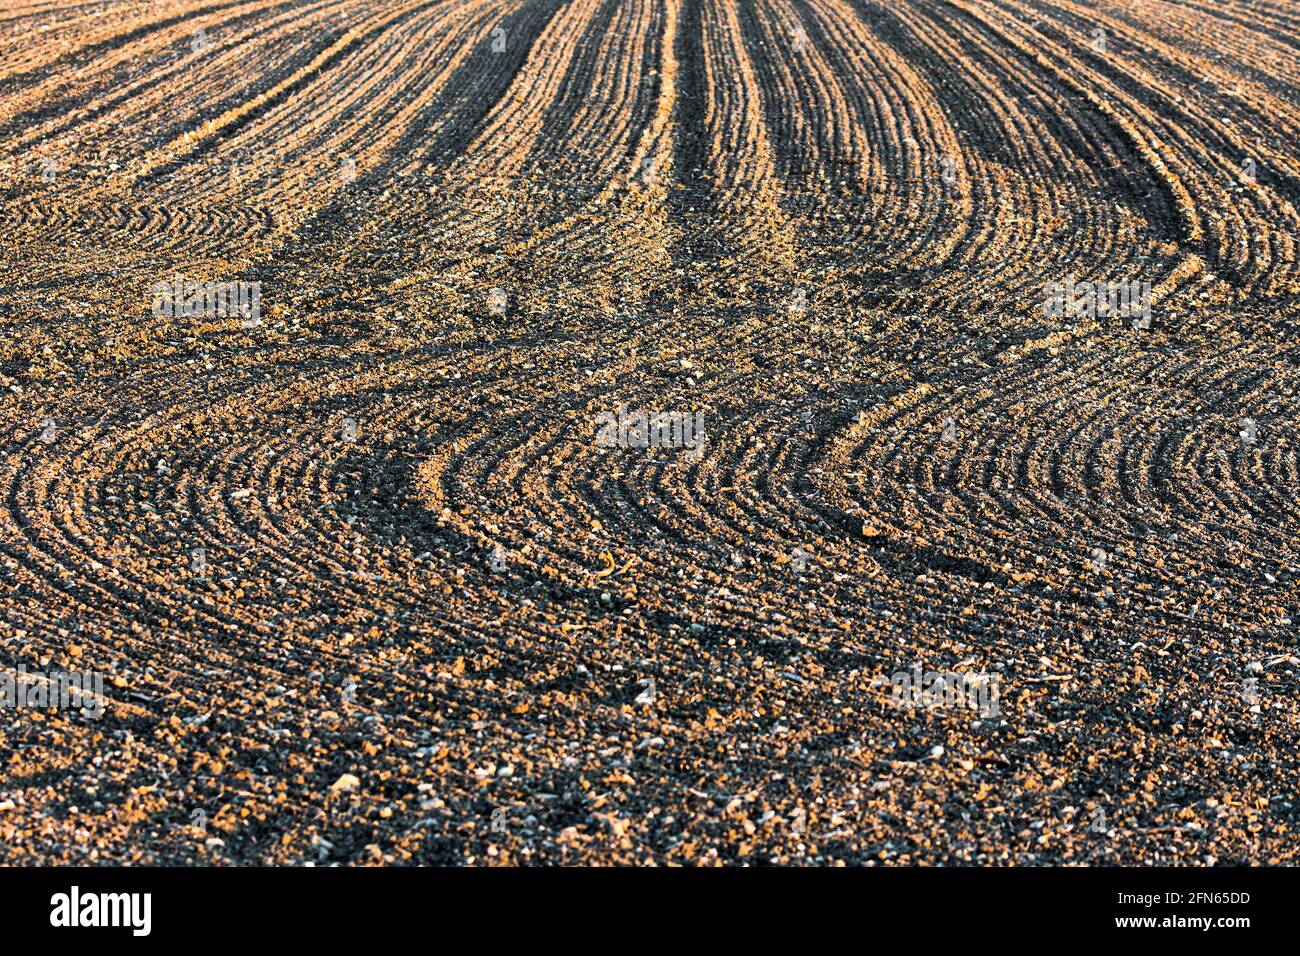 Curved lines made by farm seeding machine - central France. Stock Photo